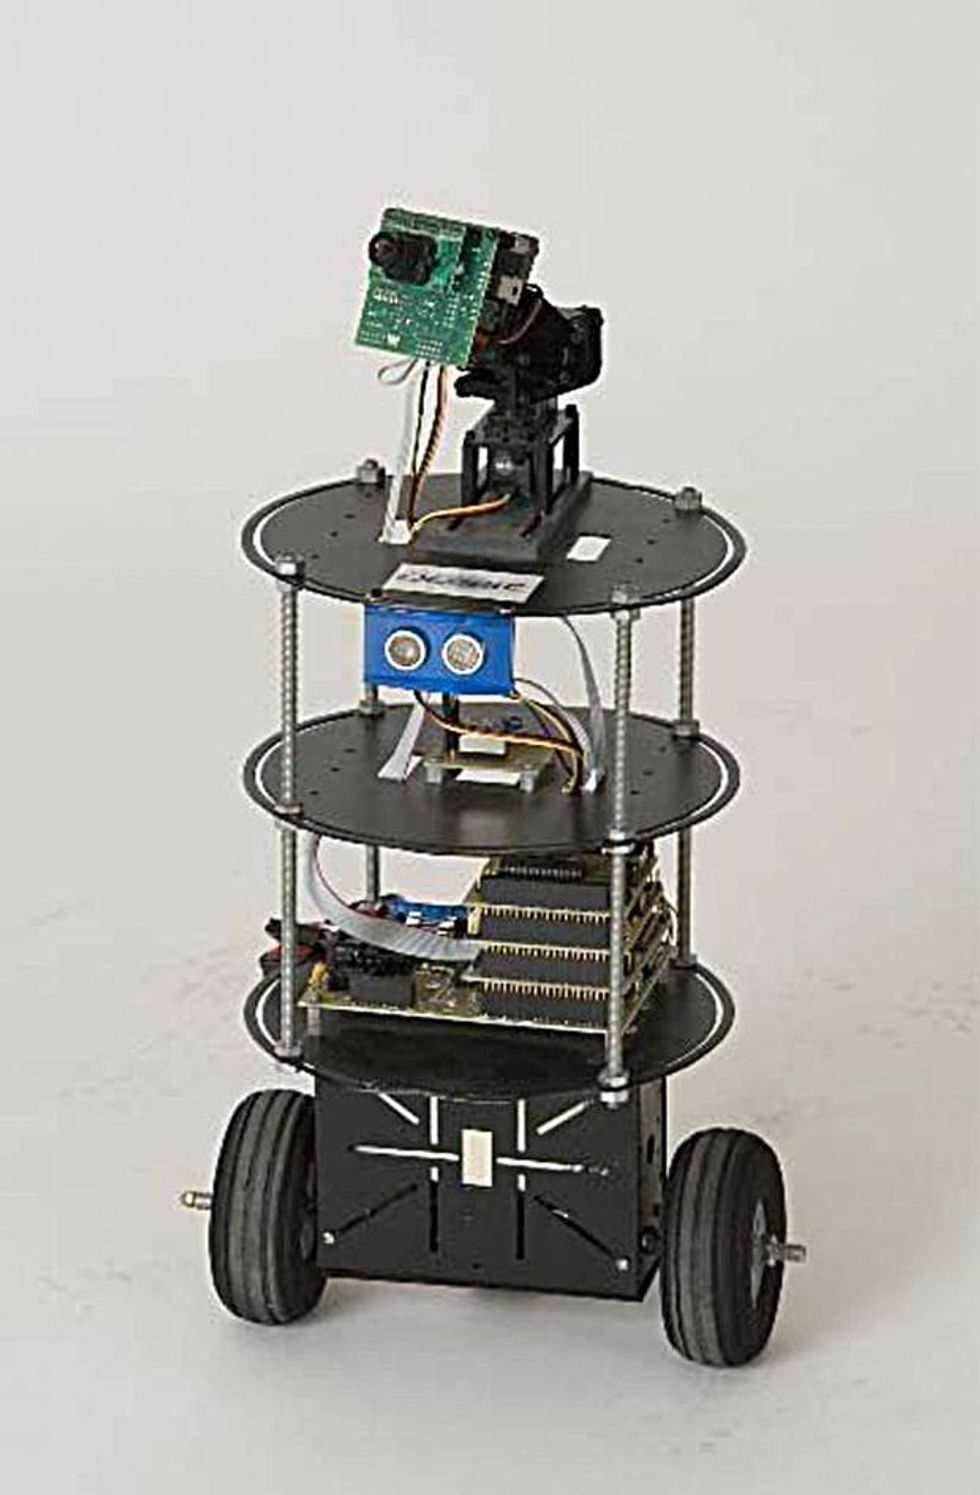 A small two wheeled robot with exposed electronics, camera, and sonar sensor